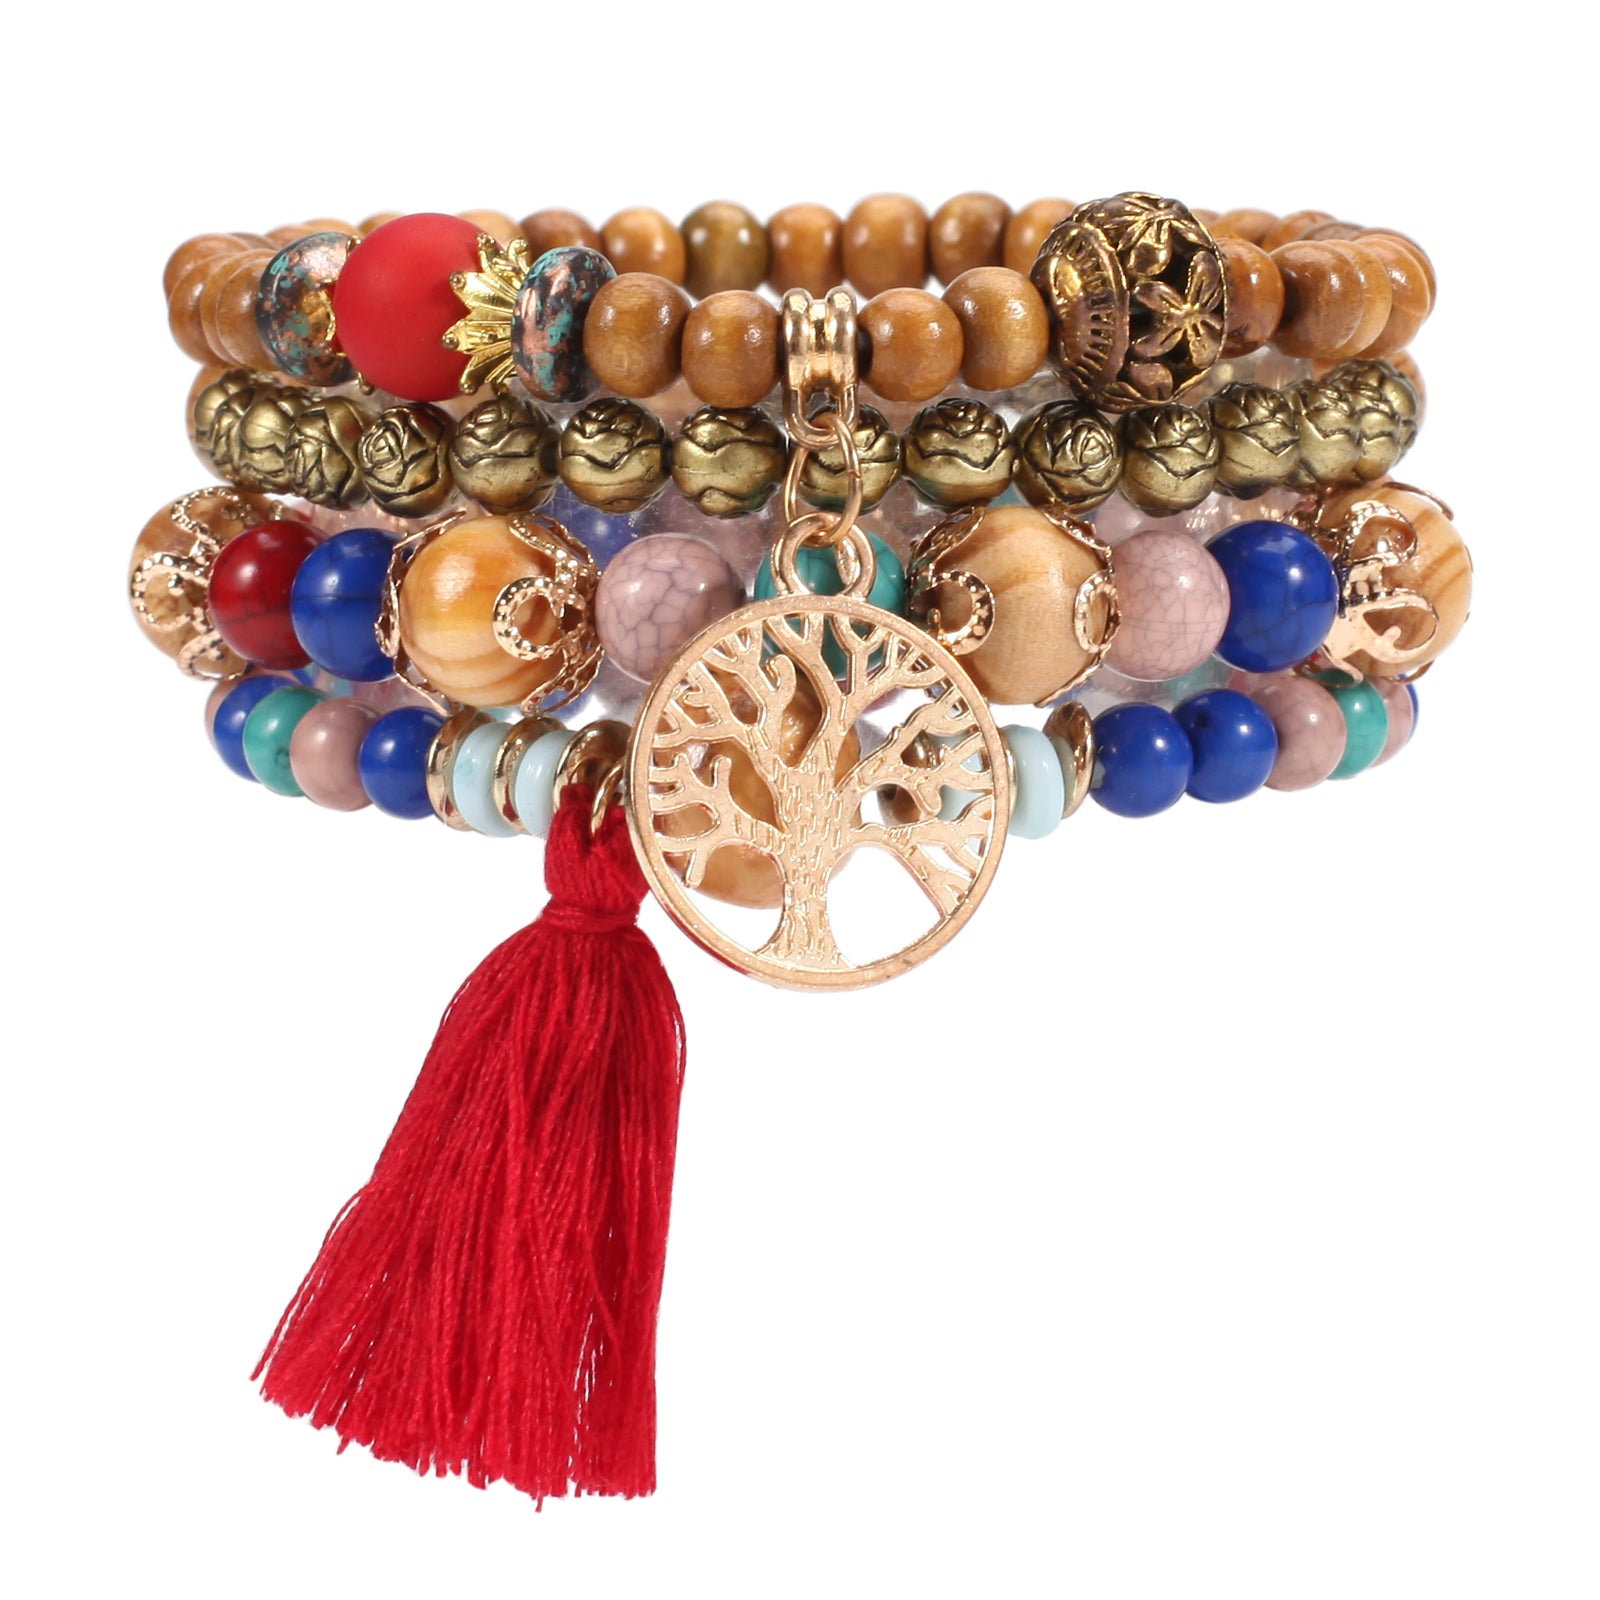 Bohemian Multilayer Beaded Bracelet with Tassel and Tree of Life Pendant - Stackable and Stretchable in Colorful Layers